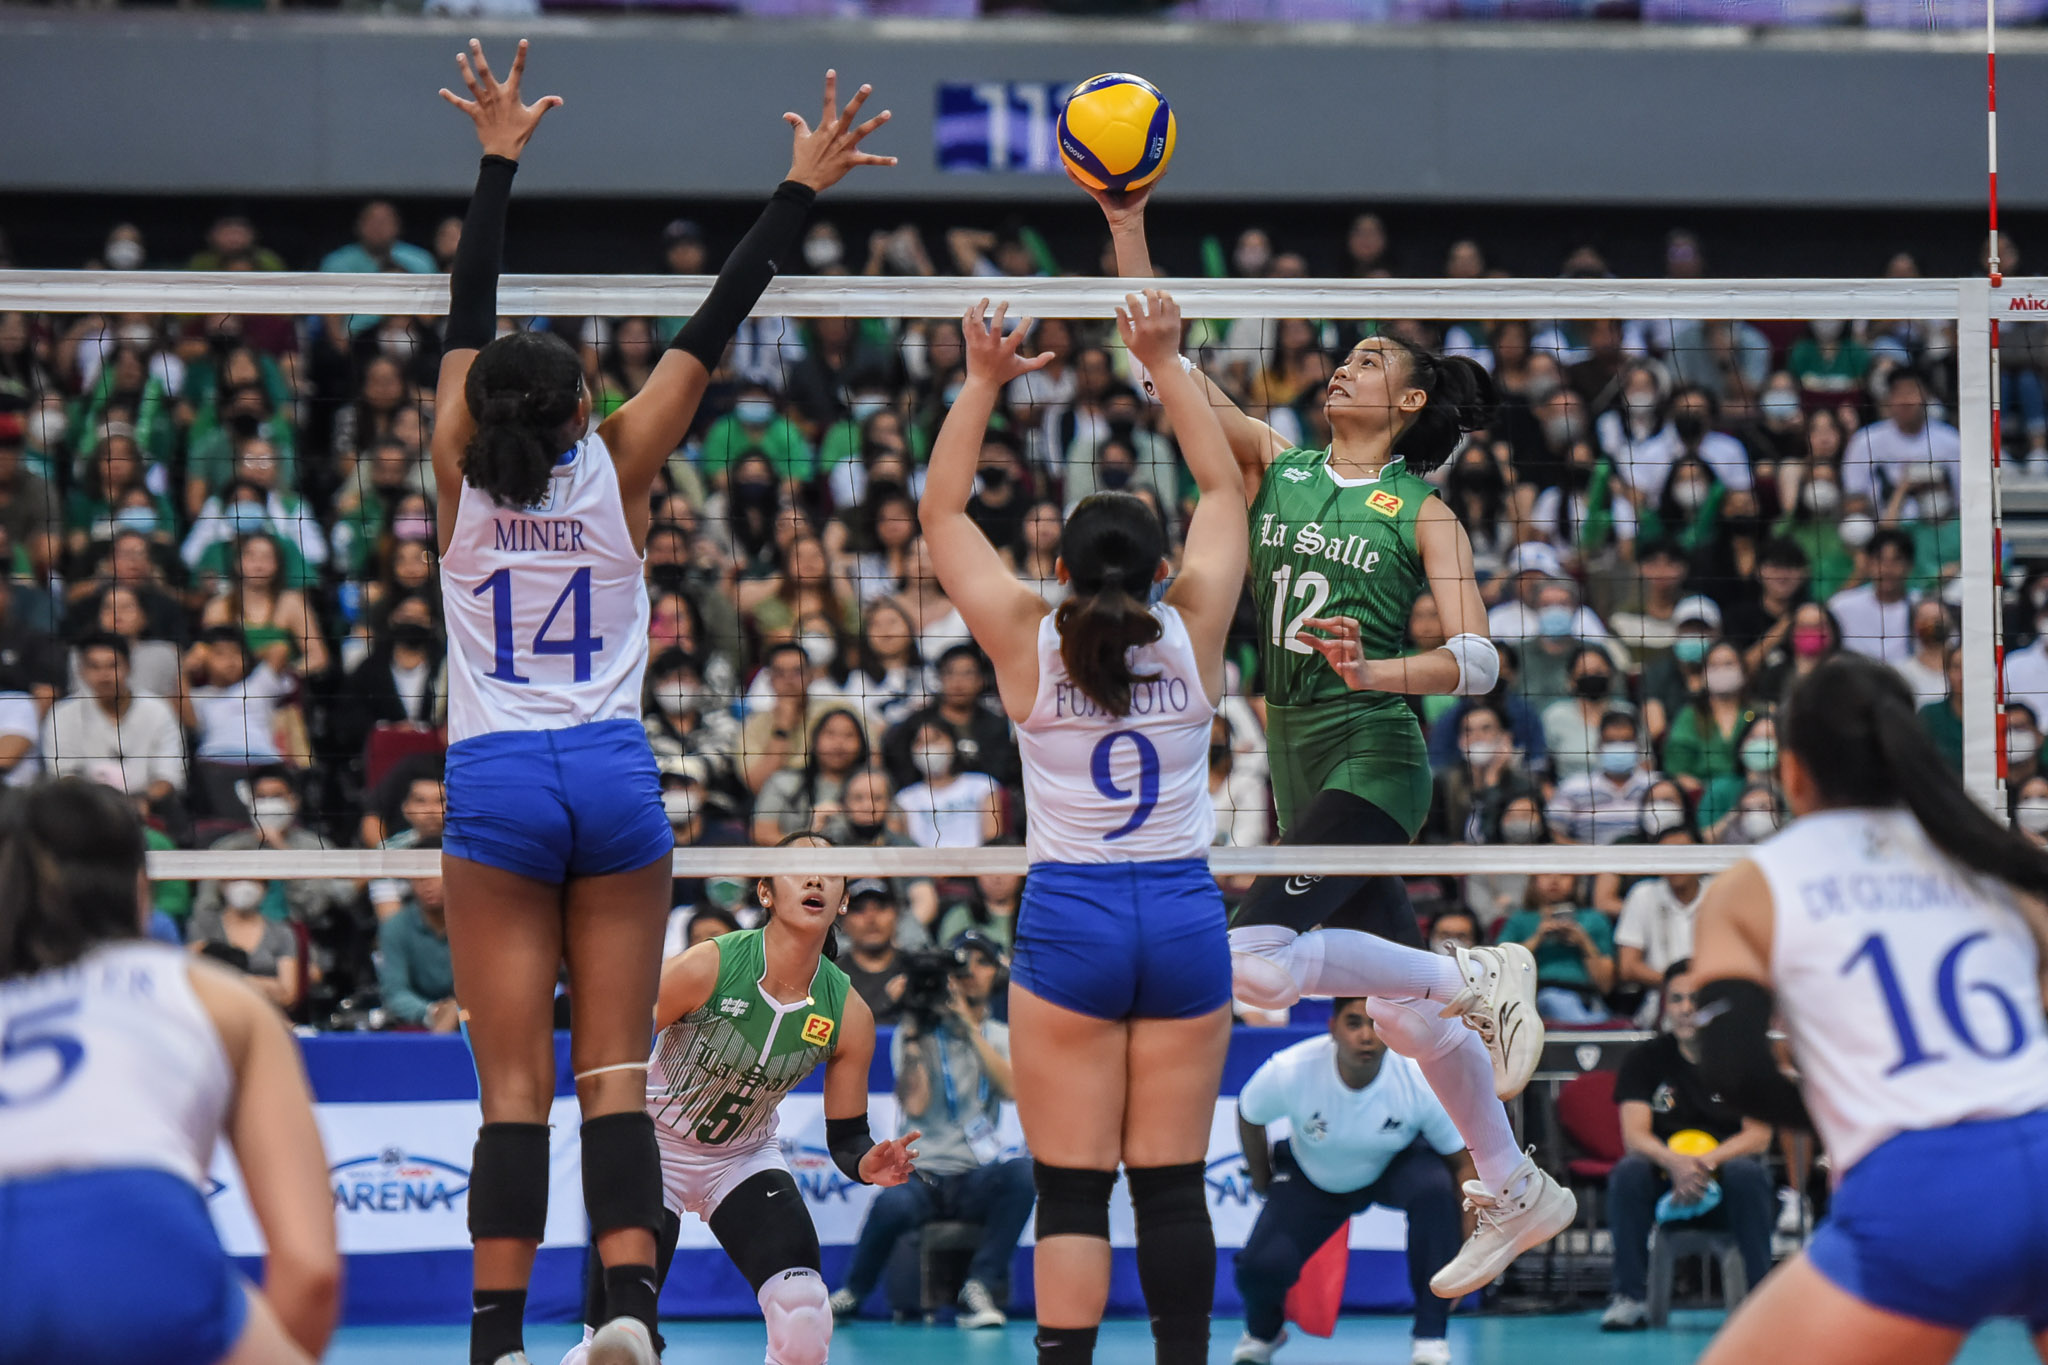 La Salle triumphs over rival Ateneo, remains undefeated